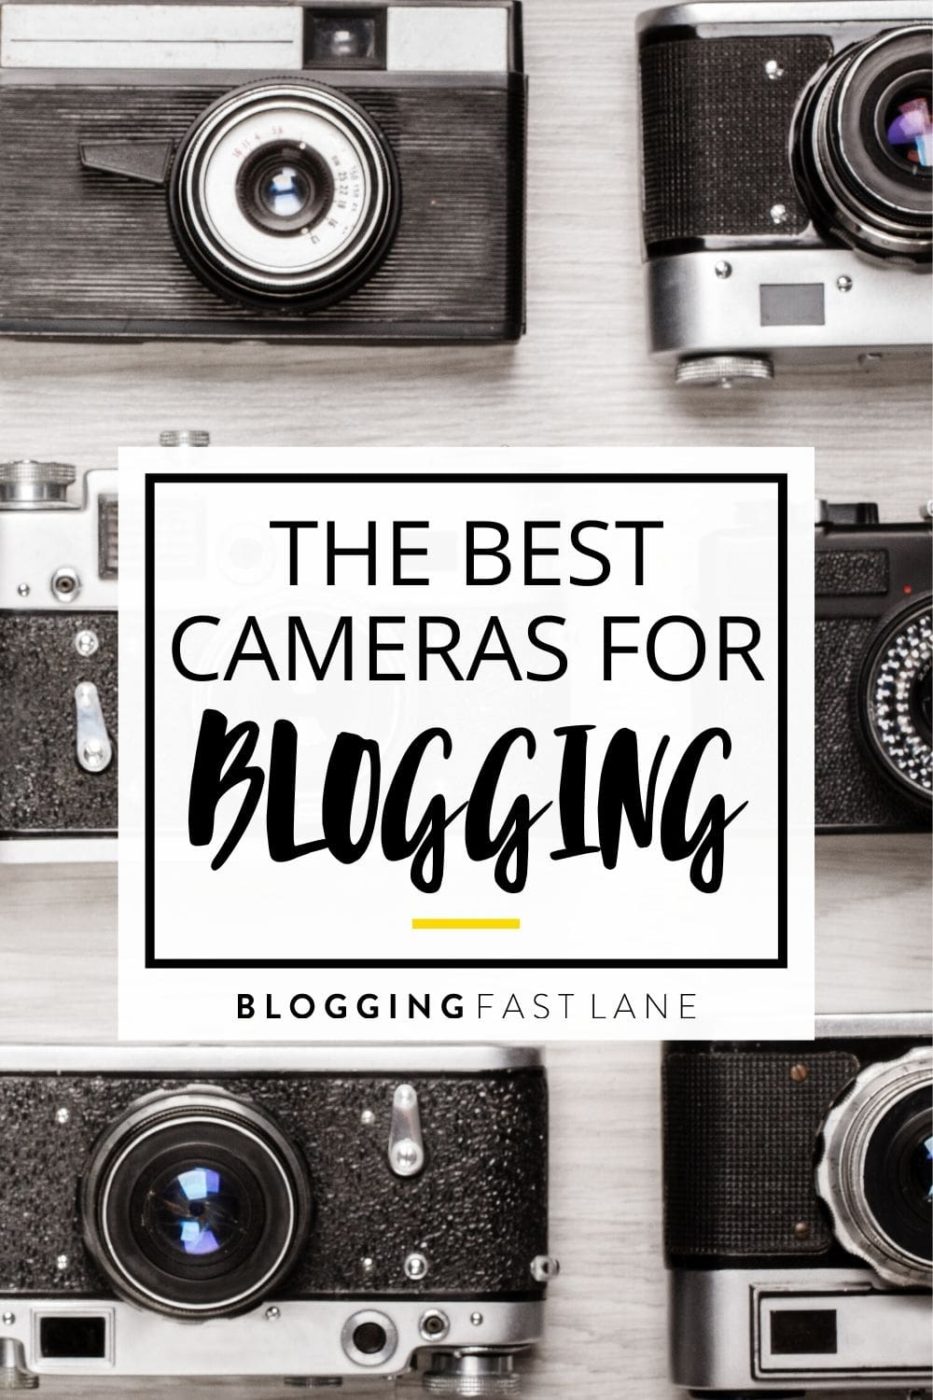 Best Cameras for Blogging | If a picture is worth 1000 words, you'd better have the best camera to make your blog images pop. Click here to check out our top 10 blogging camera recommendations!